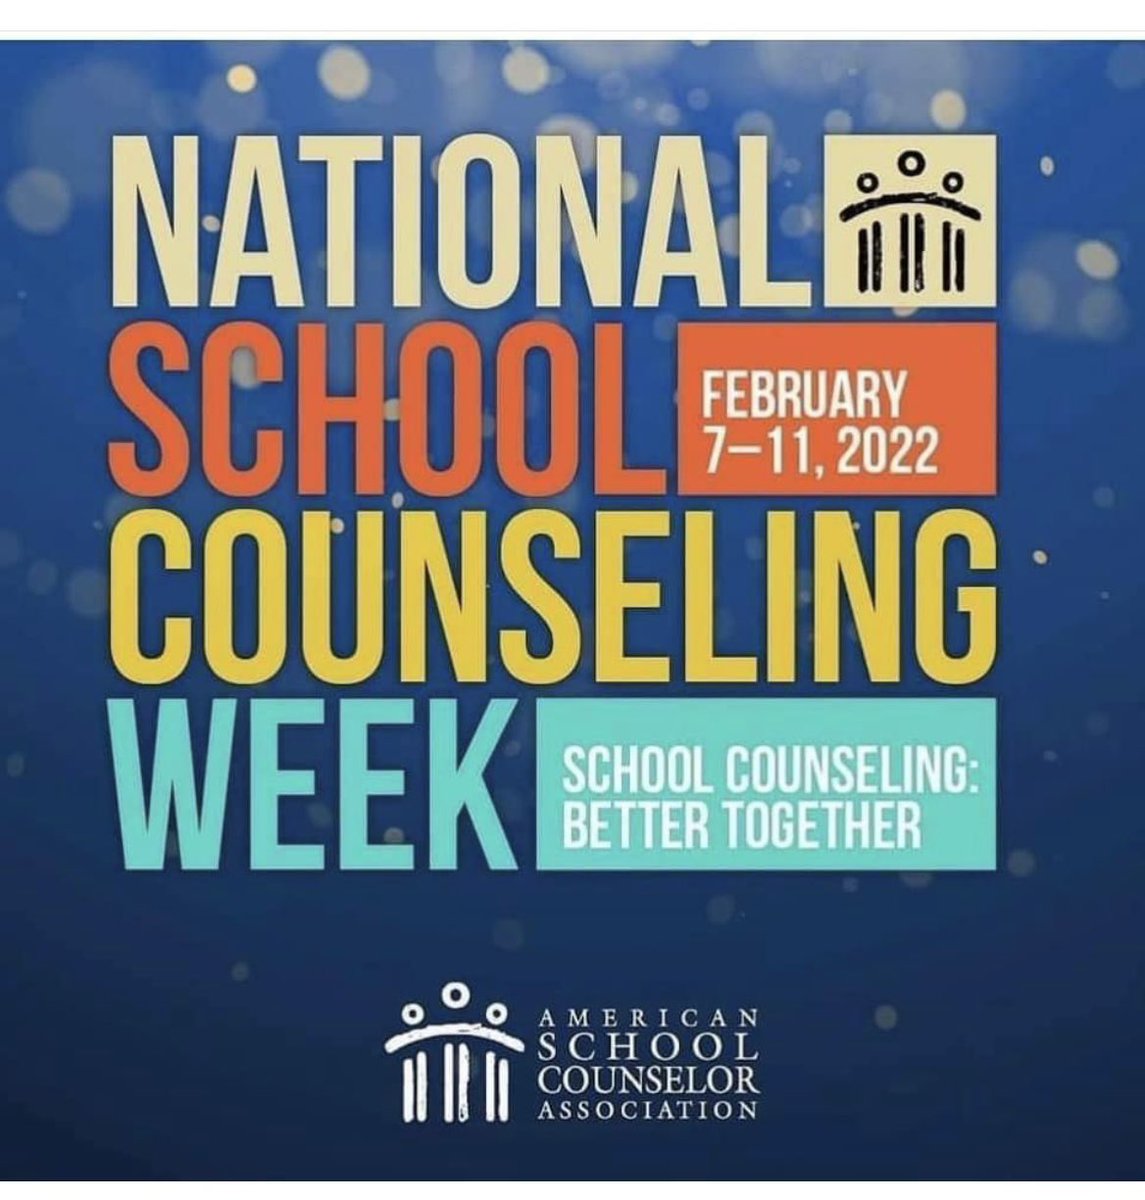 We would like to express our gratitude to the most amazing counselor in APS who we were lucky enough to bring on board this year! @MESMellick - thank you for your relentless dedication to our Dolphins! Happy Nat’l Counseling Week! @AudreySofianos @atlantaeducator #NSCW22